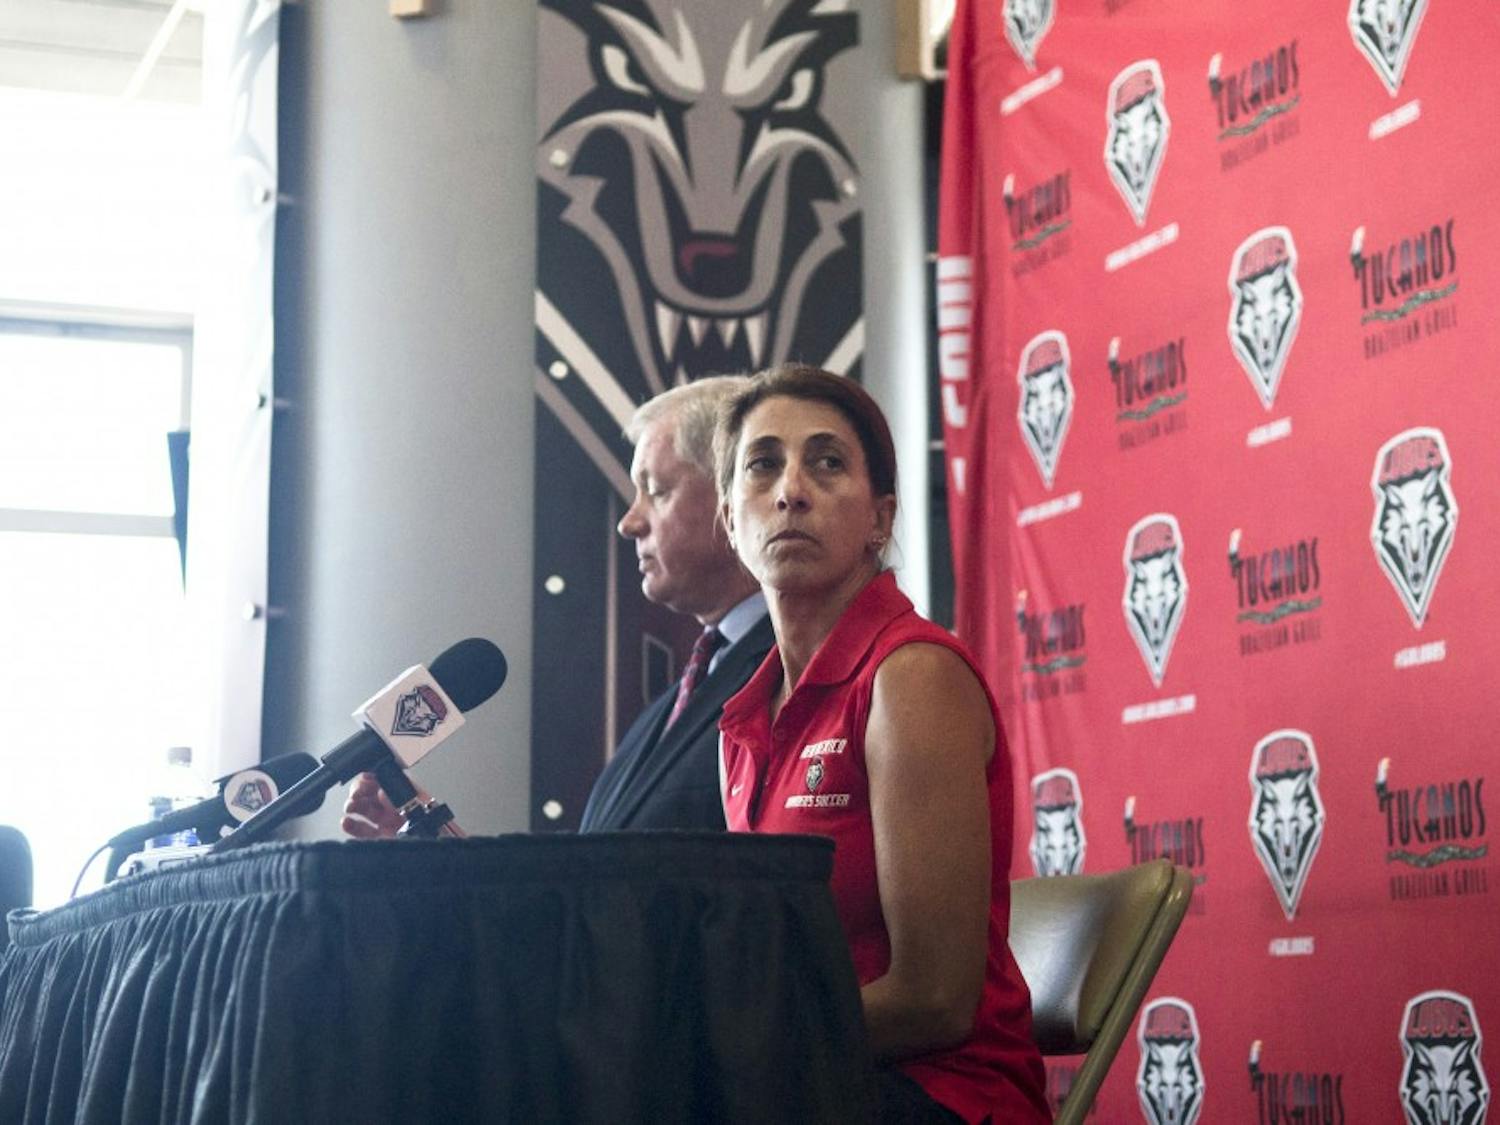 	New Mexico women’s soccer Head Coach Kit Vela awaits questions from the media at the Tow Diehm Athletic Center on Wednesday. UNM Athletic Director Paul Krebs confirmed at the press conference that the team did commit acts of hazing.